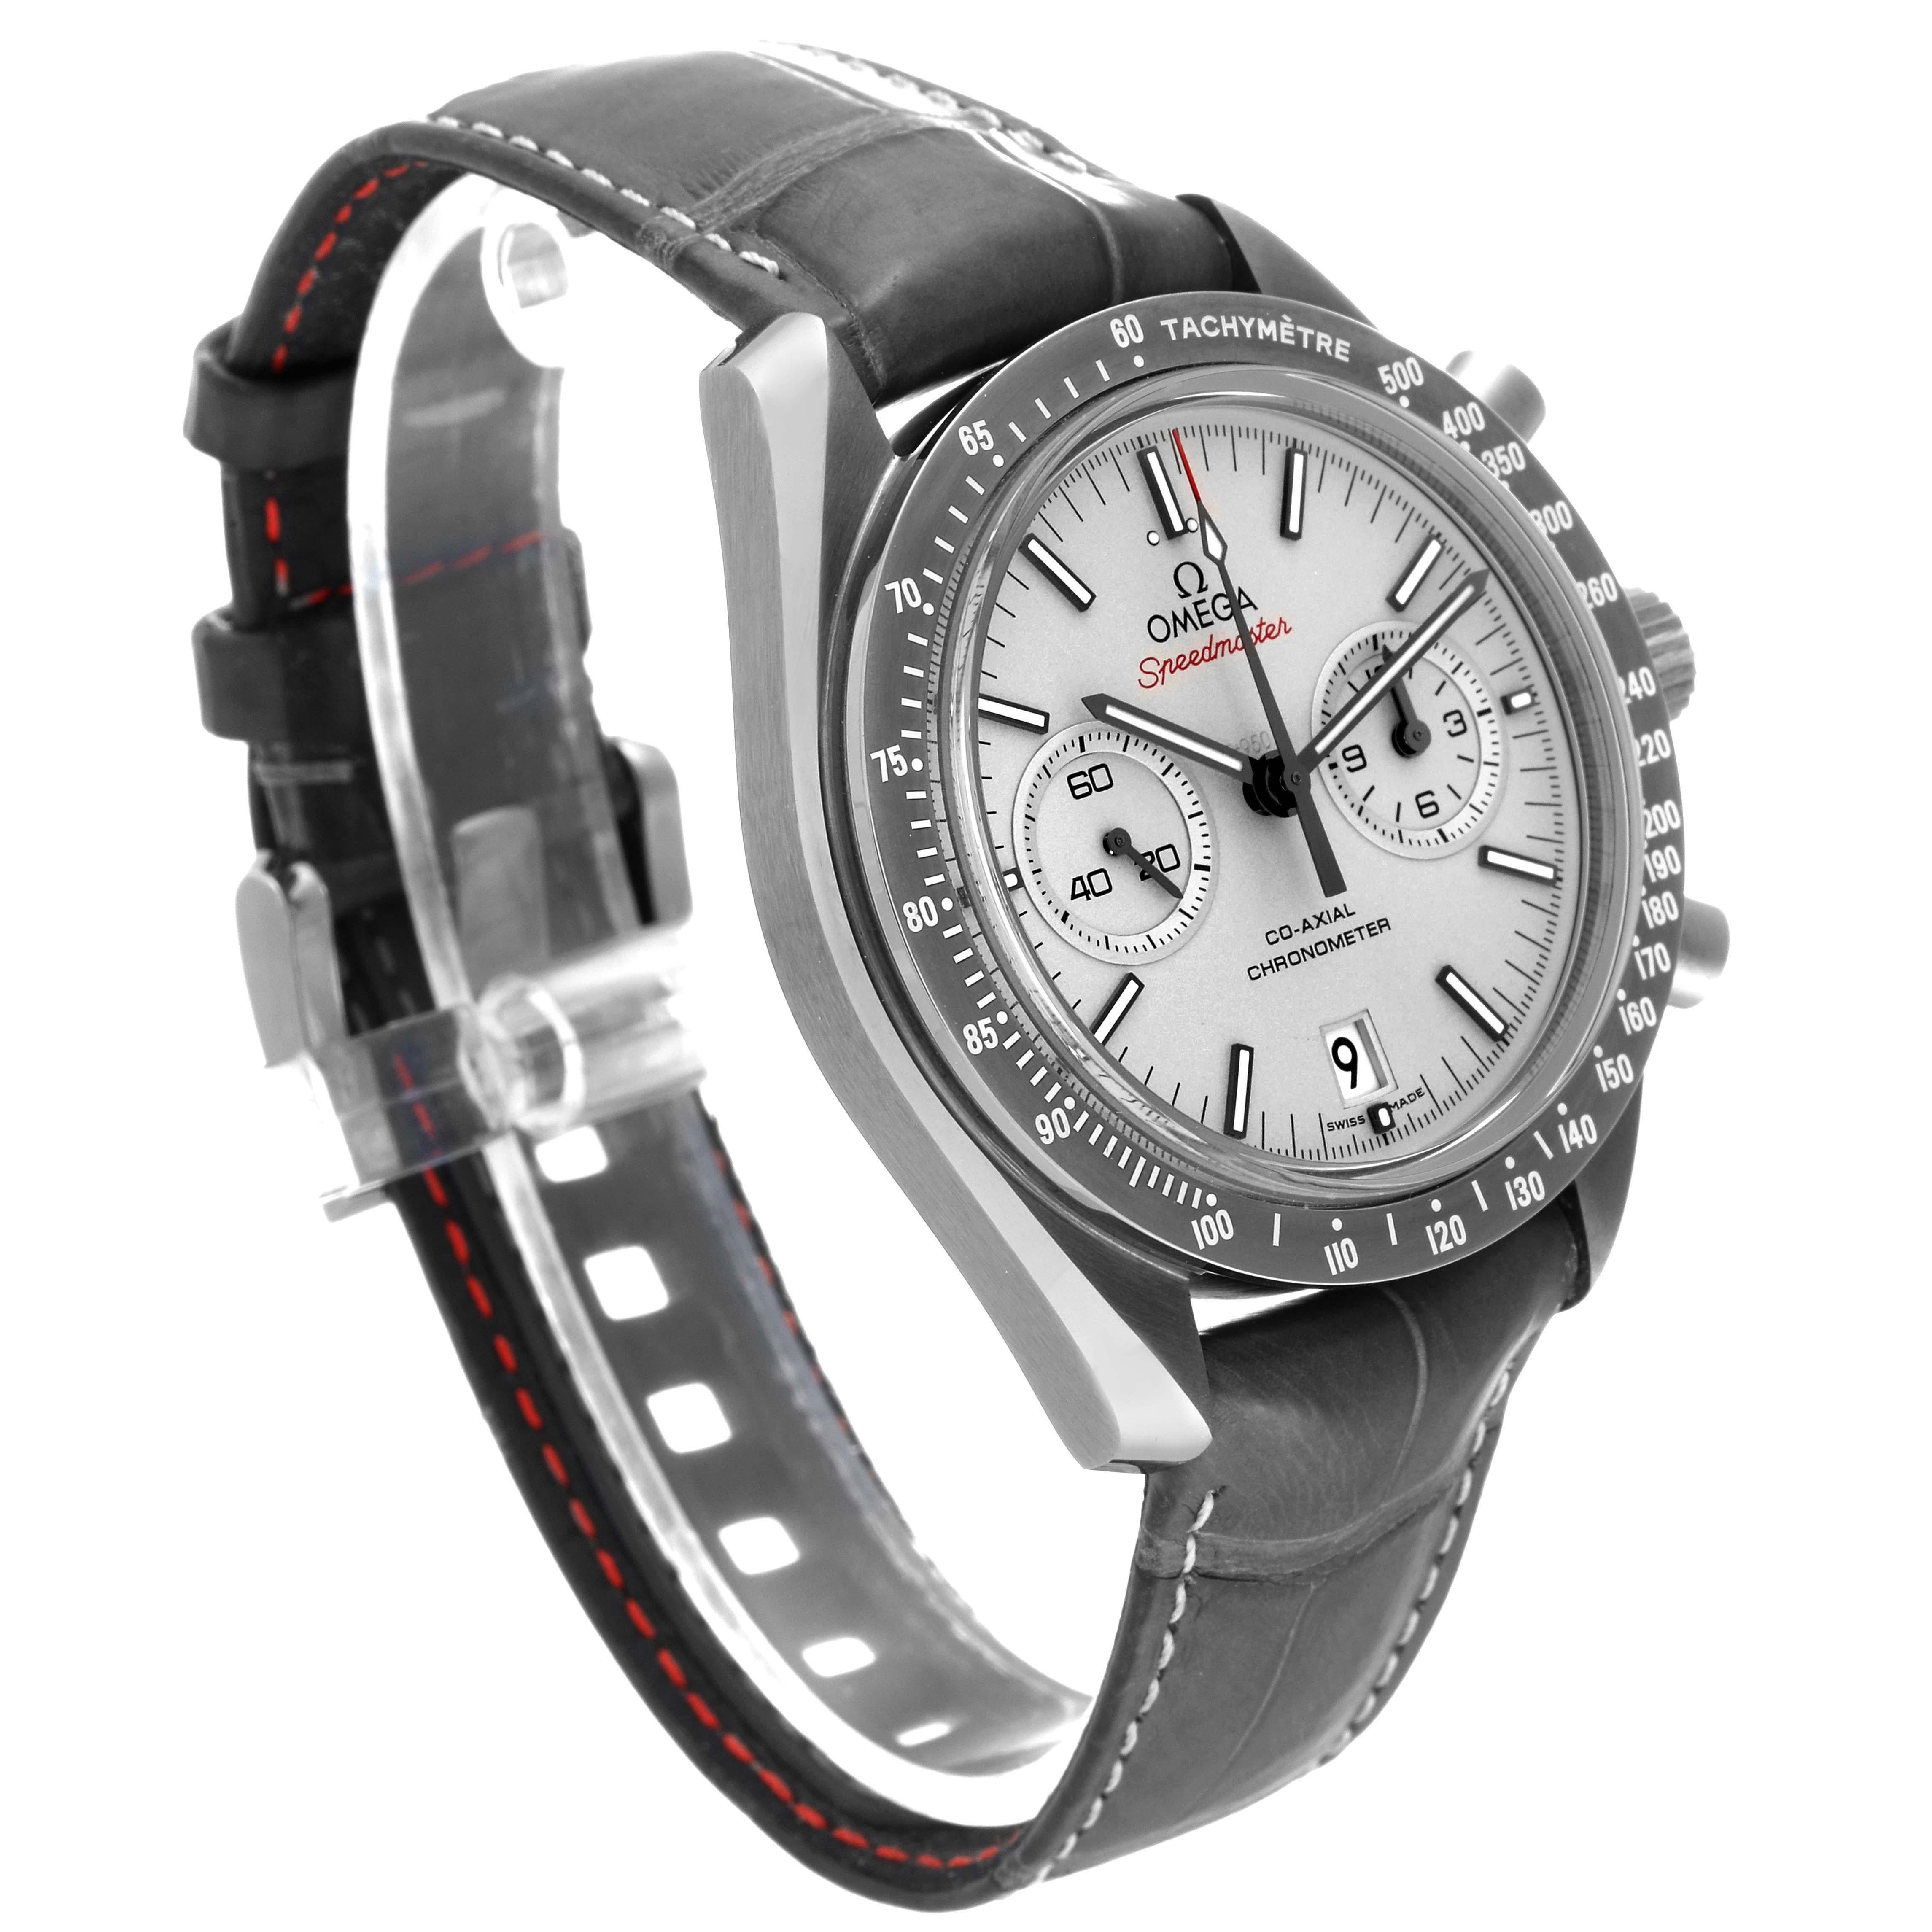 Omega Speedmaster Grey Side of the Moon Ceramic Mens Watch 311.93.44.51.99.001 Box Card. Automatic self-winding chronograph movement with column wheel mechanism and Co-Axial Escapement for greater precision, stability and durability of the movement.